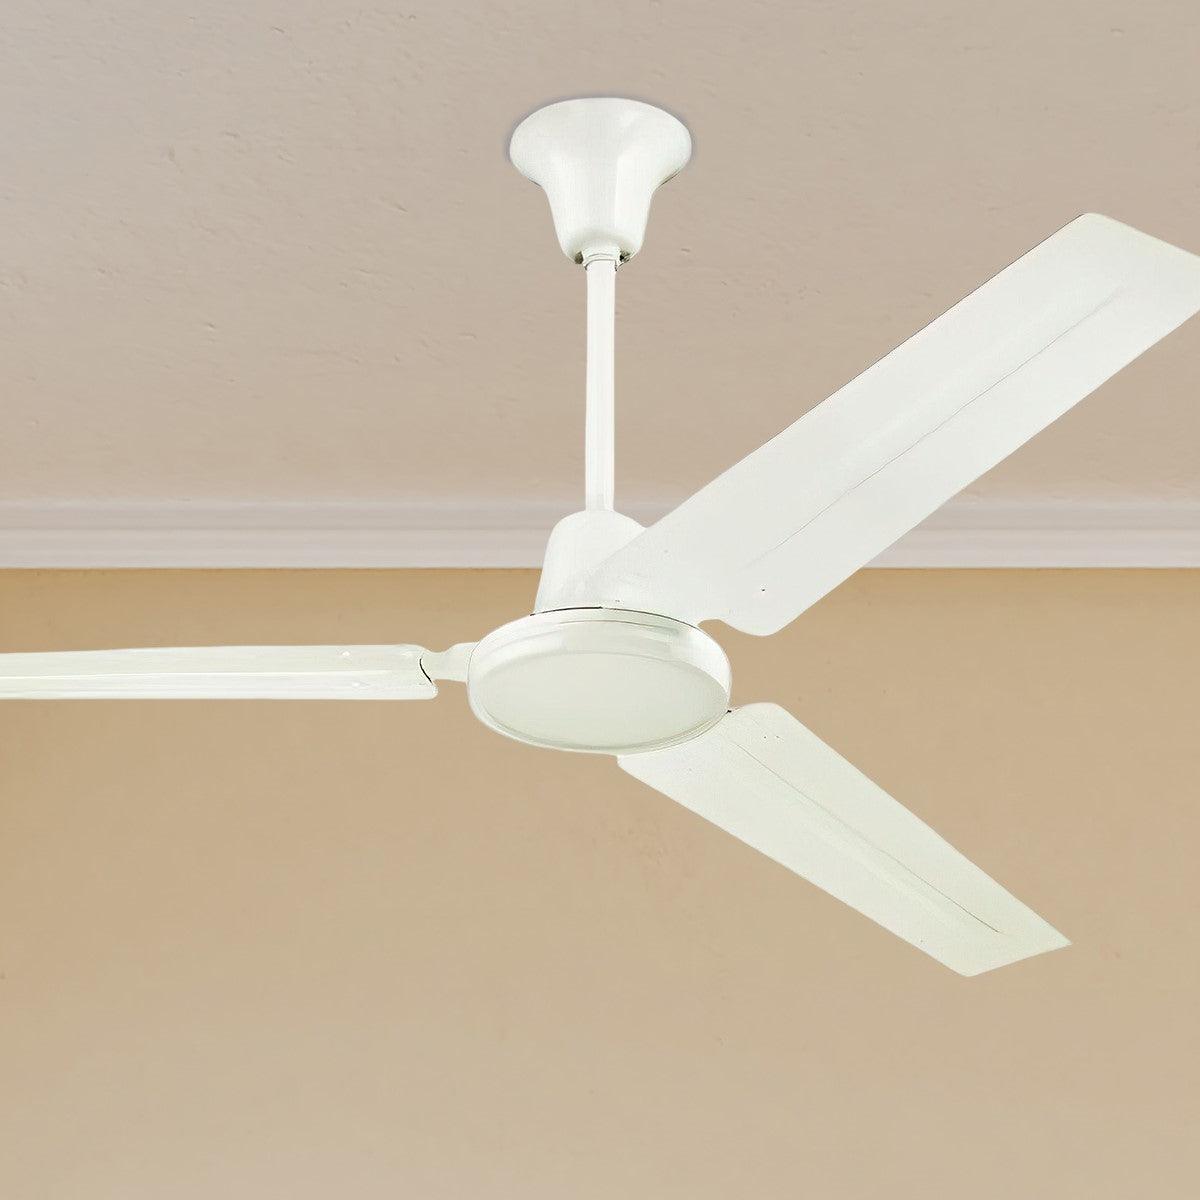 Jax 56 Inch White Industrial Ceiling Fan With Wall Control, J-Hook Installation System - Bees Lighting